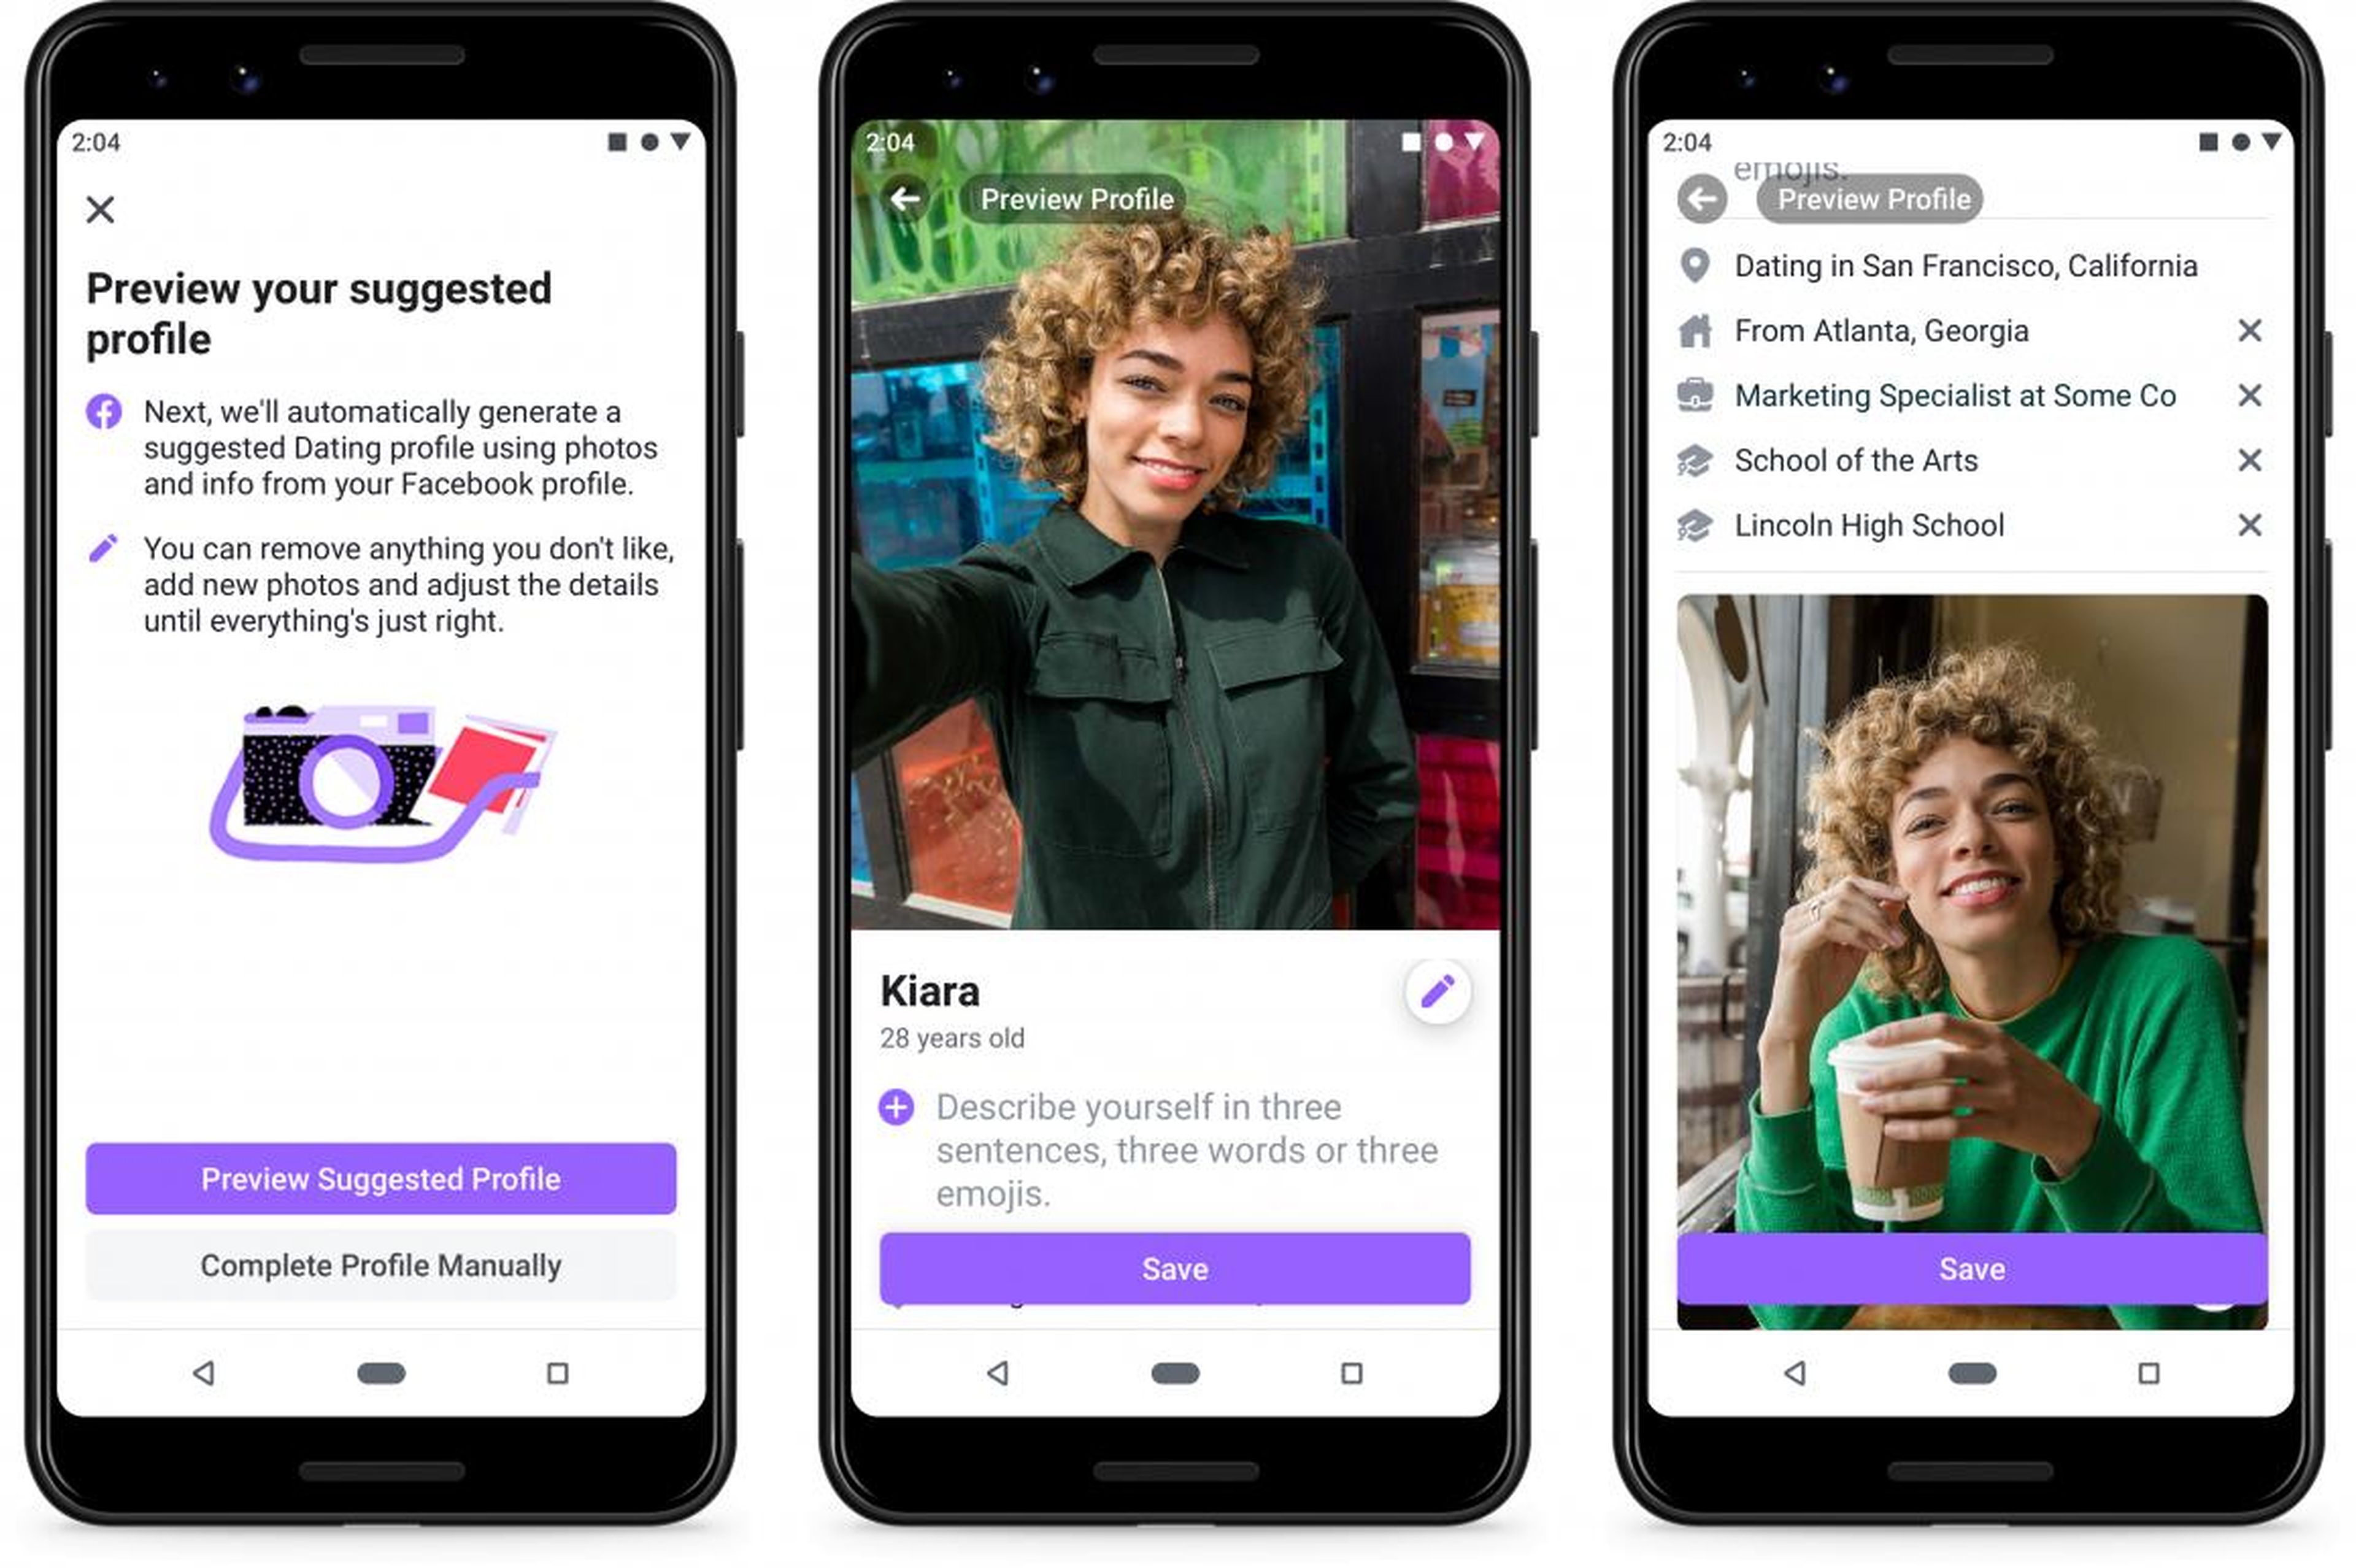 Unsurprisingly, Facebook Dating allows users to automatically fill in their profiles will information from their Facebook profile. It's something that other dating apps have done before, both to make it easy to get started, and to